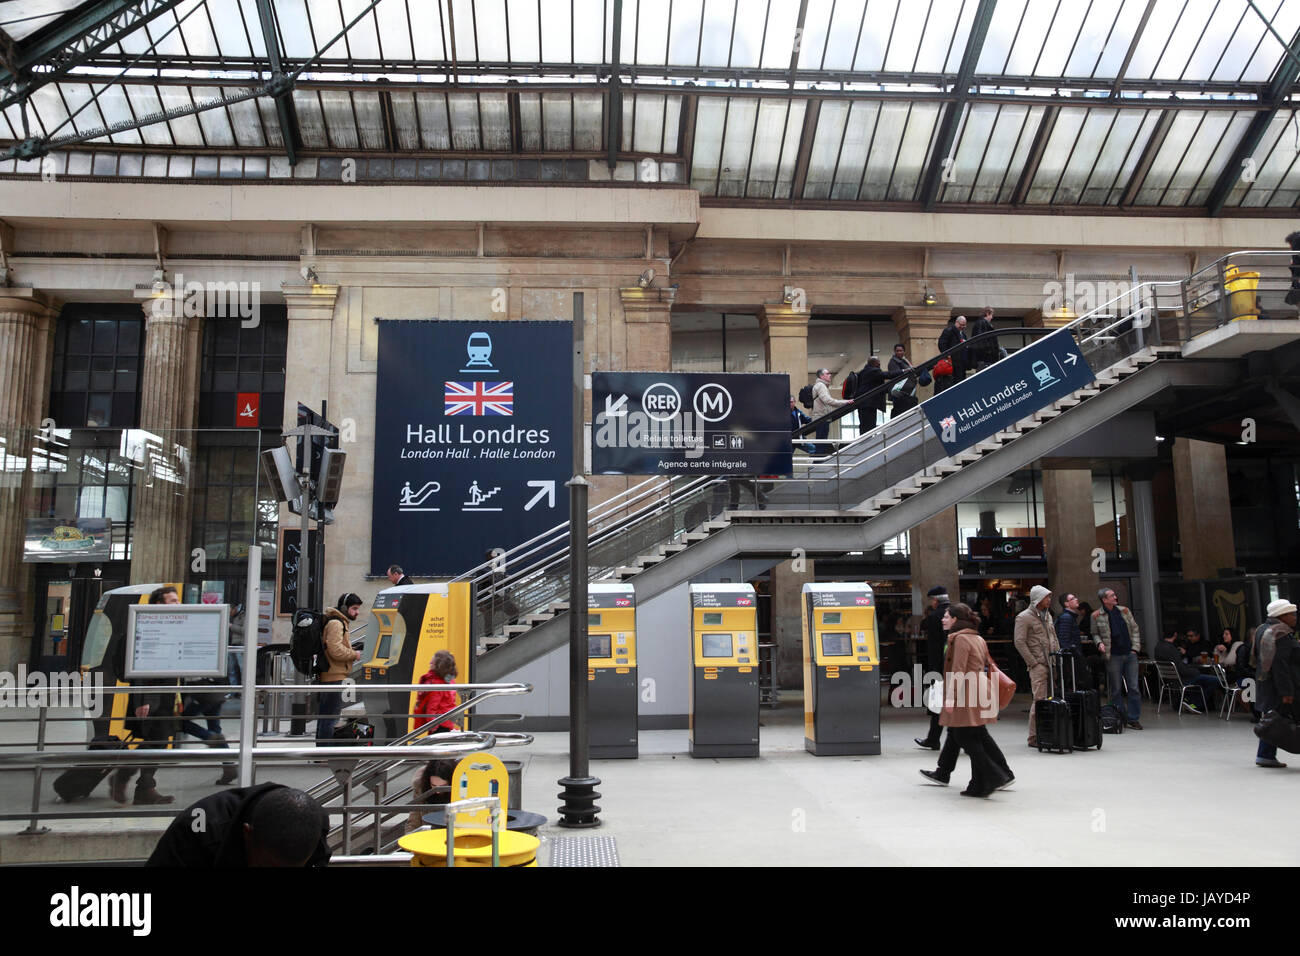 The escalator to the London Hall at the Gare du Nord, the railway station for travellers on Eurostar and to northern France. Stock Photo